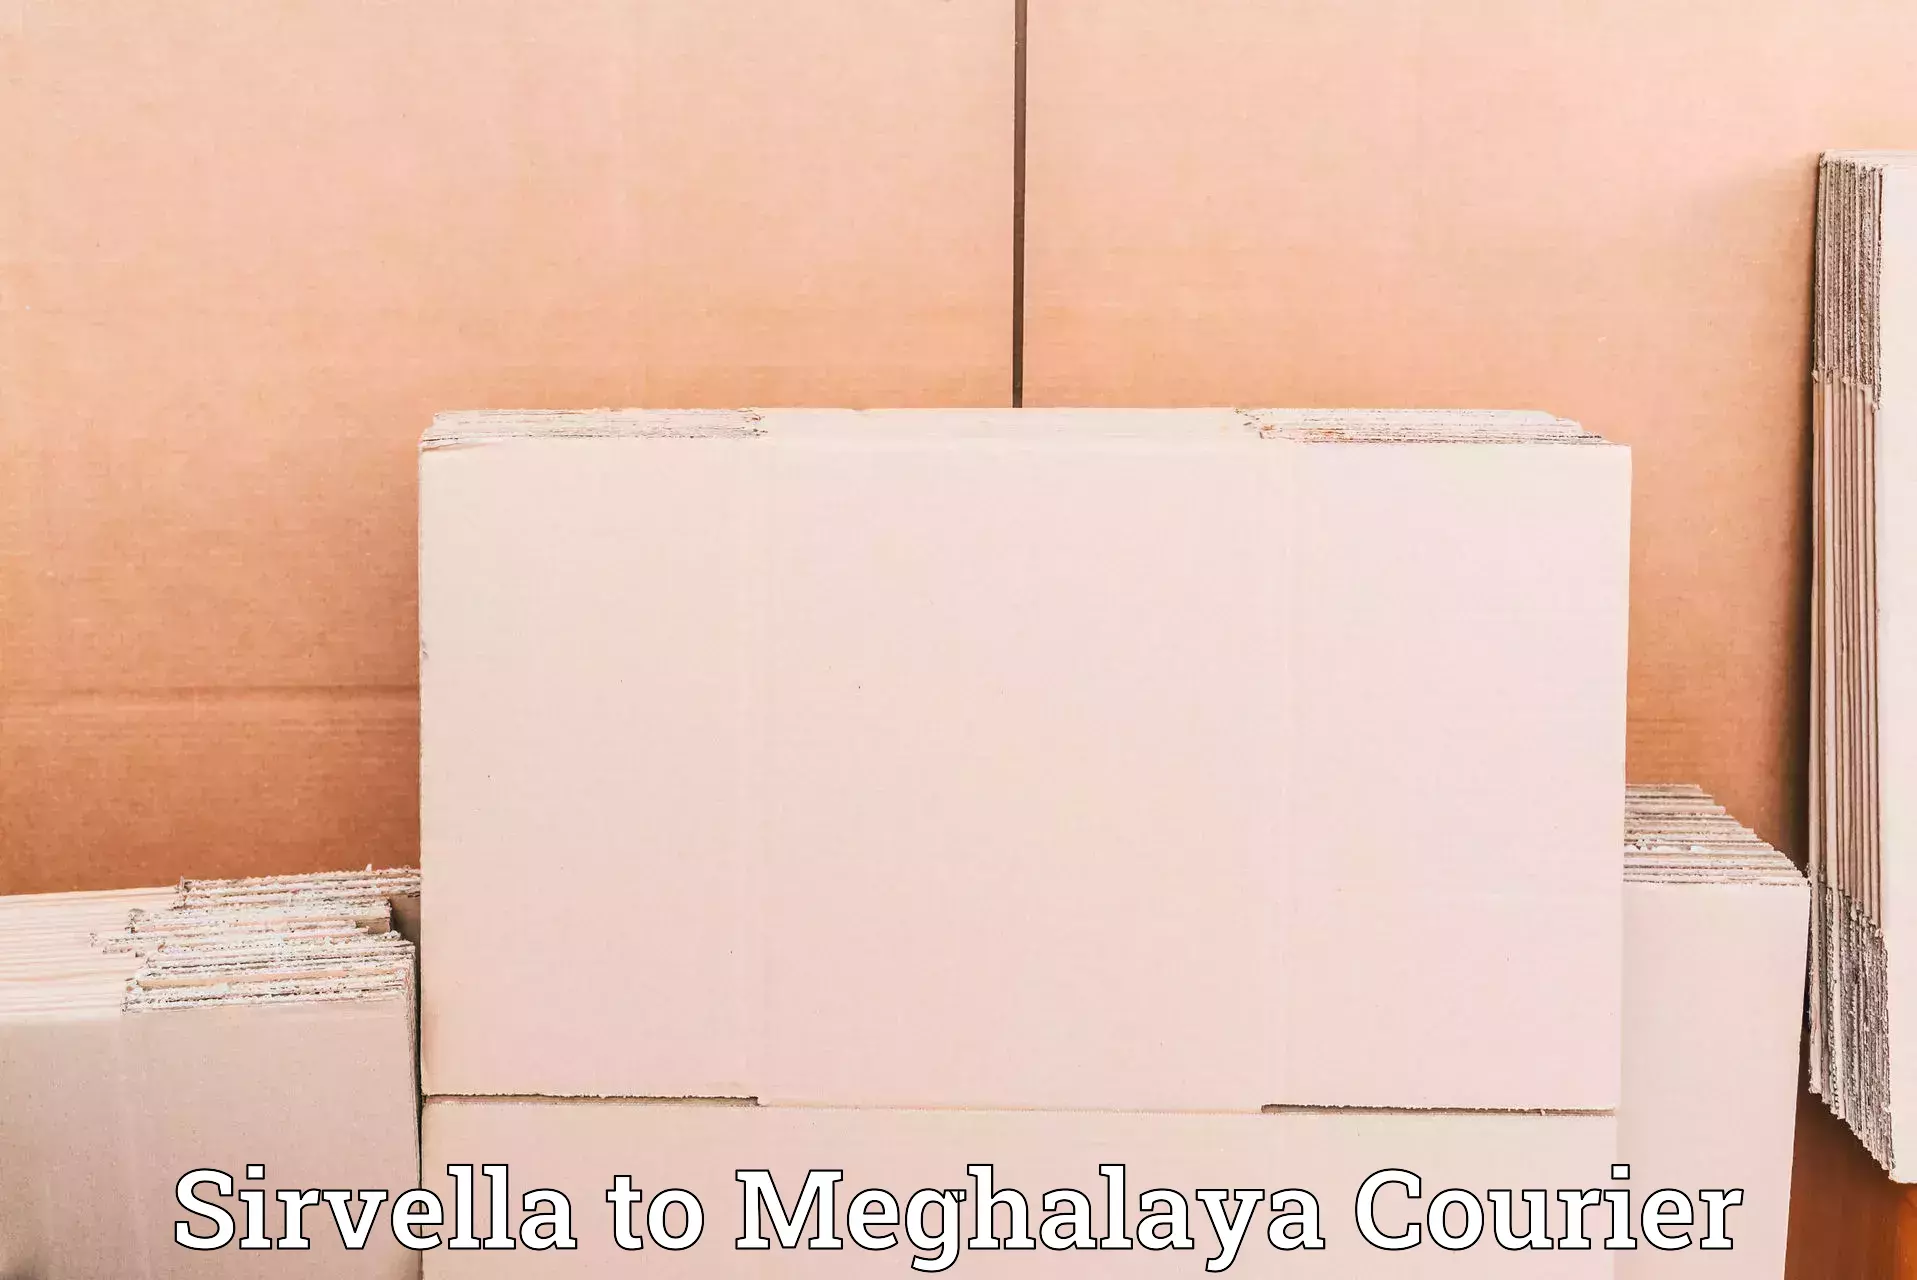 Efficient order fulfillment in Sirvella to Marshillong